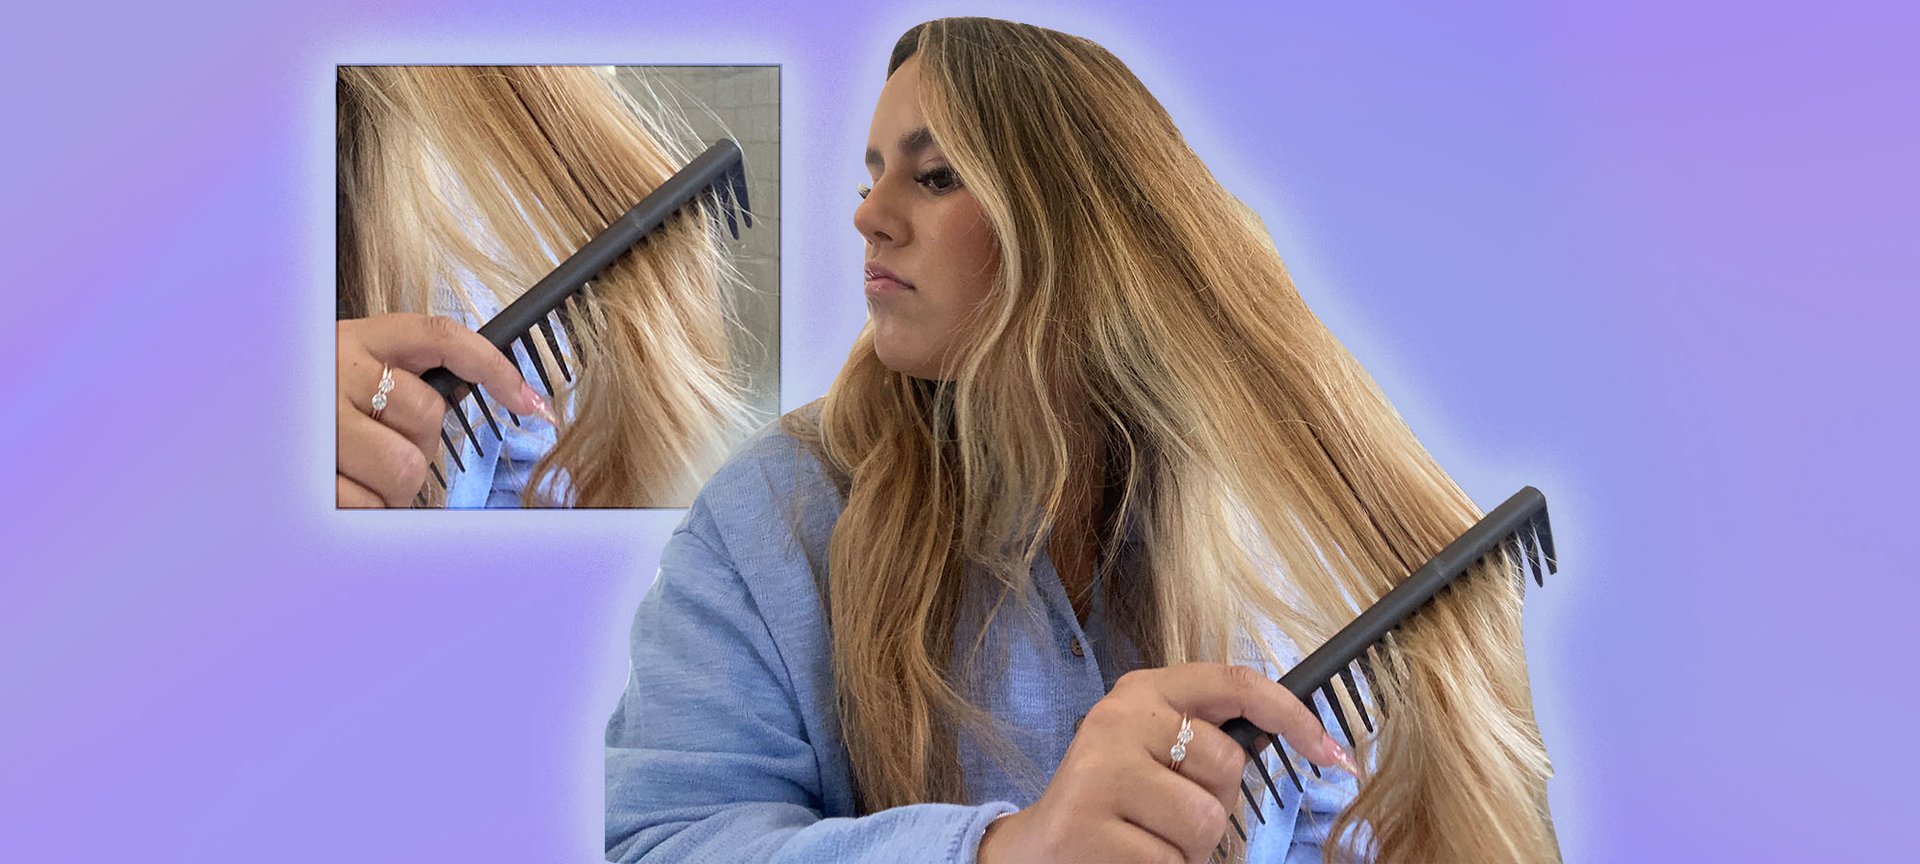 7 Reasons to Use a Wide Tooth Comb - L'Oréal Paris